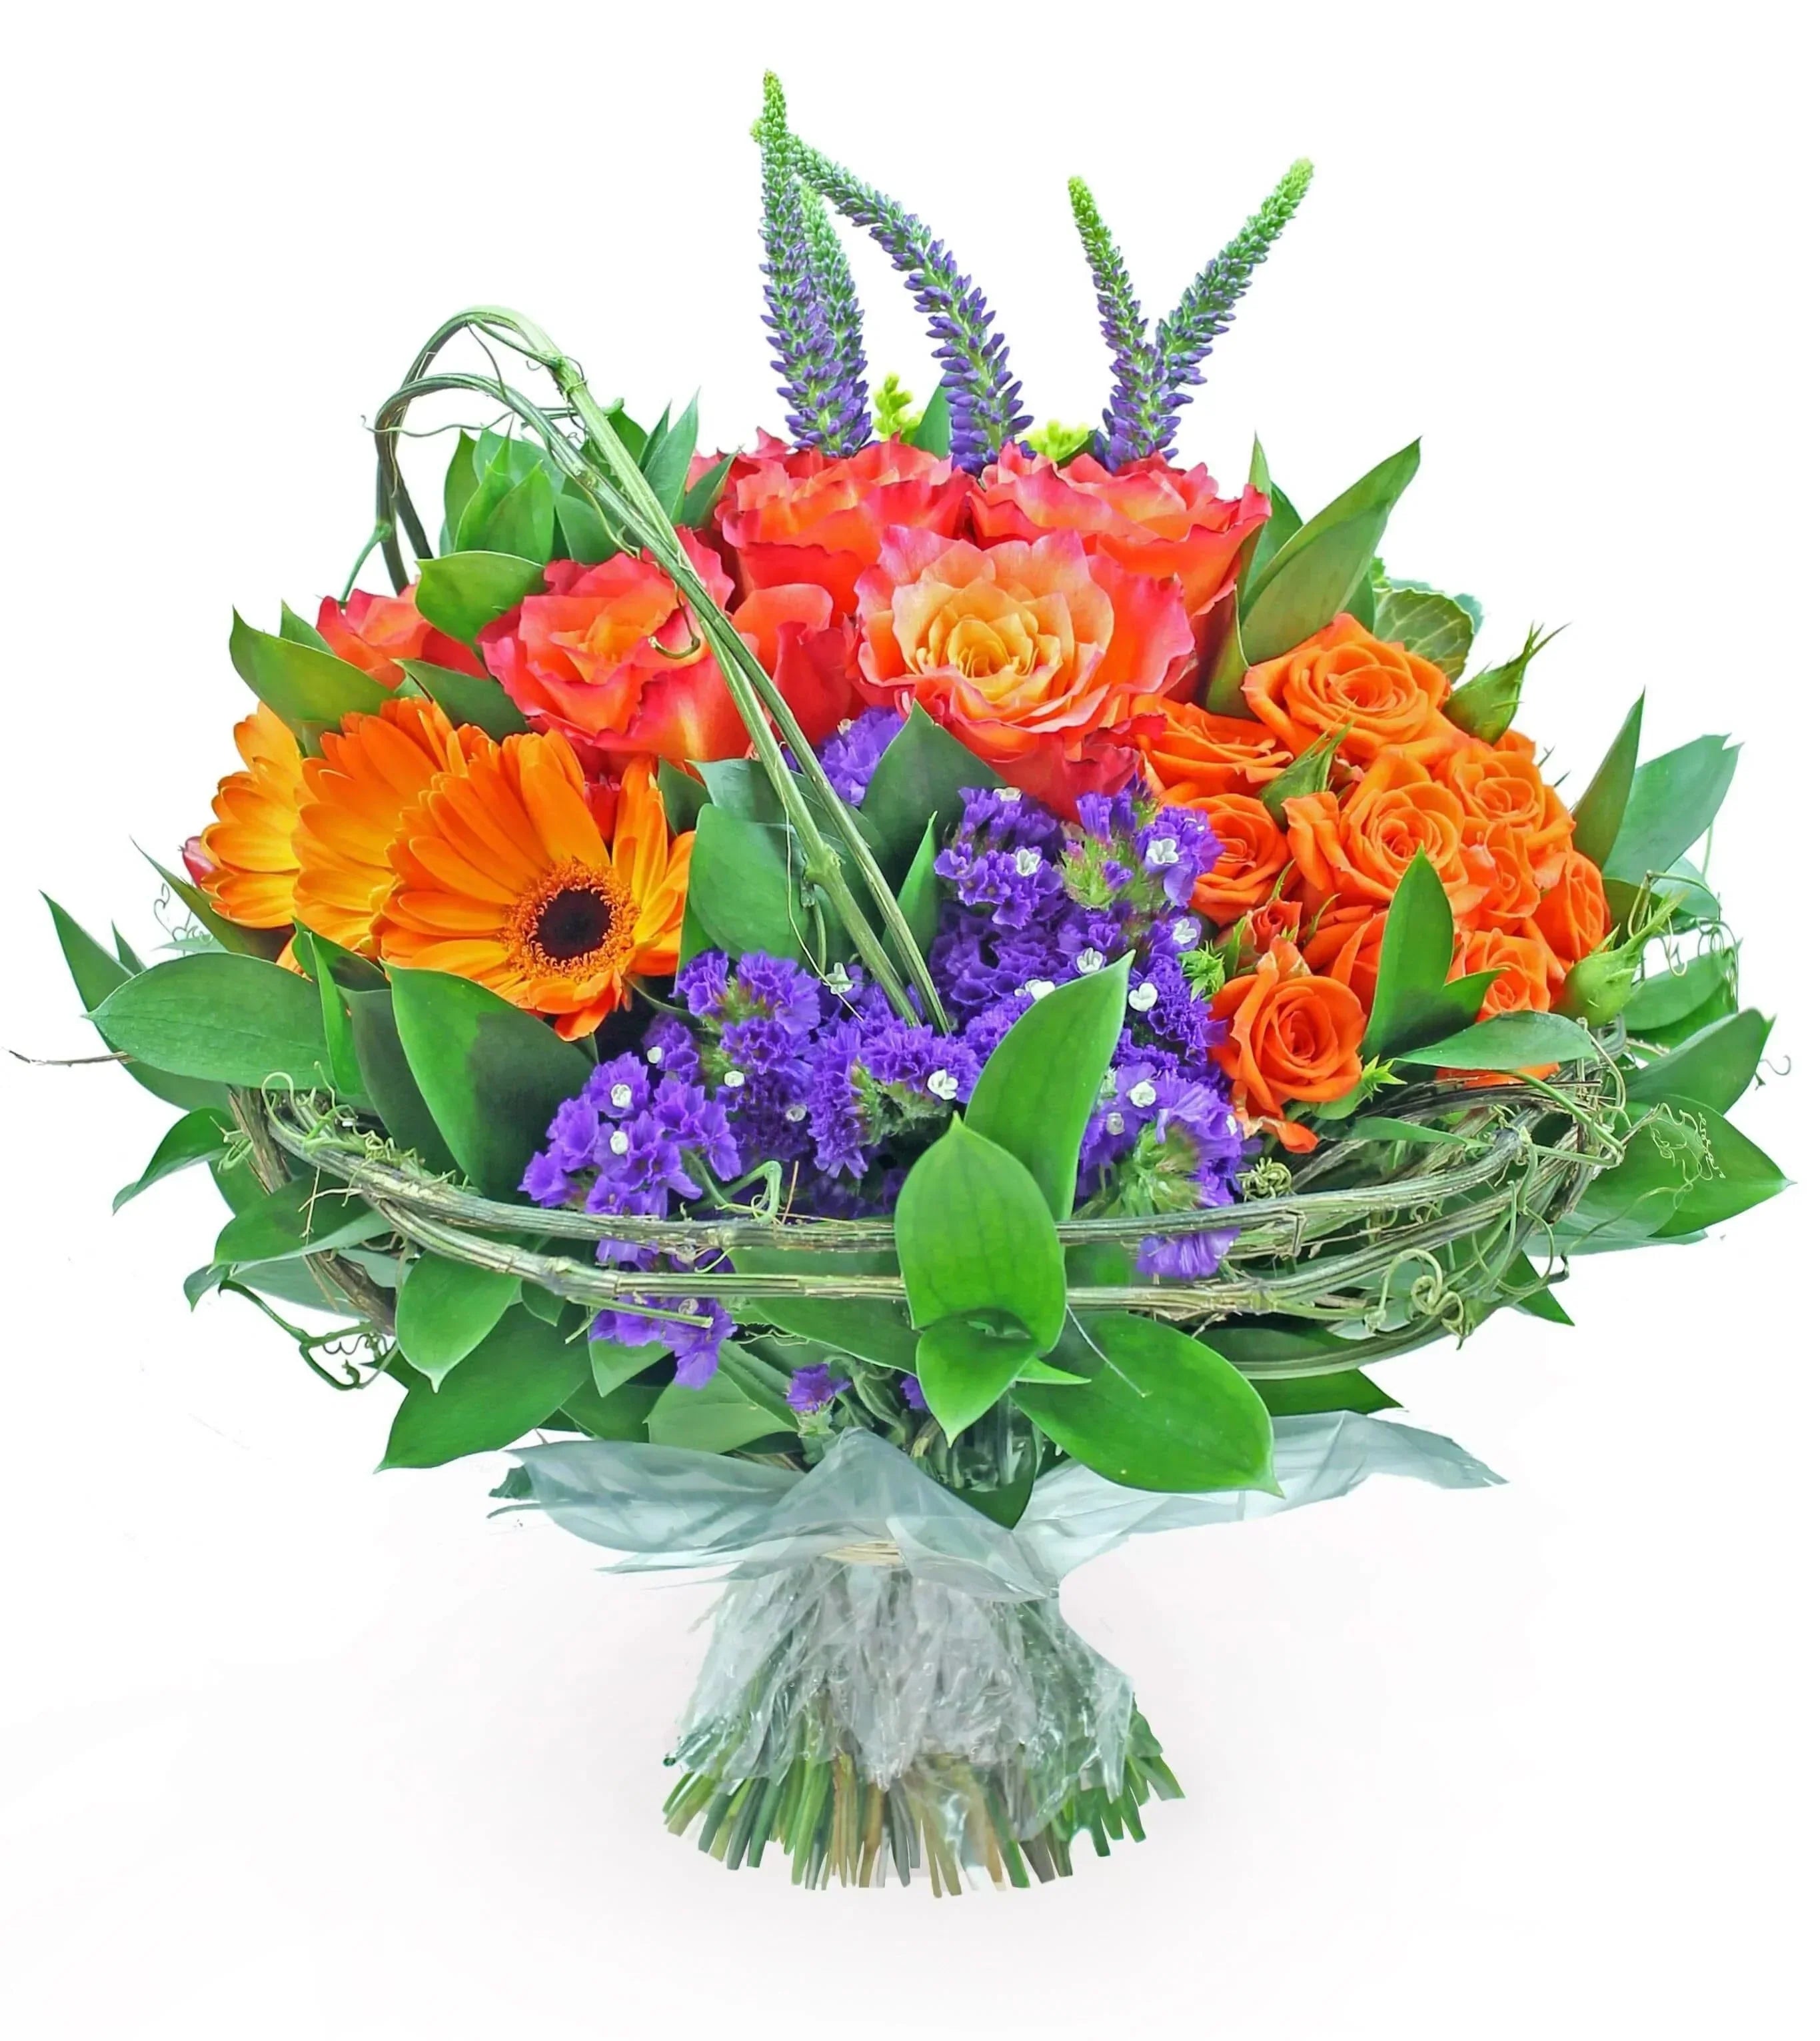 Mixed luxury bouquet in warm tones with gerberas, sinensis, roses, spray roses, veronicas, kale, achillea, hypericum and ruscus.